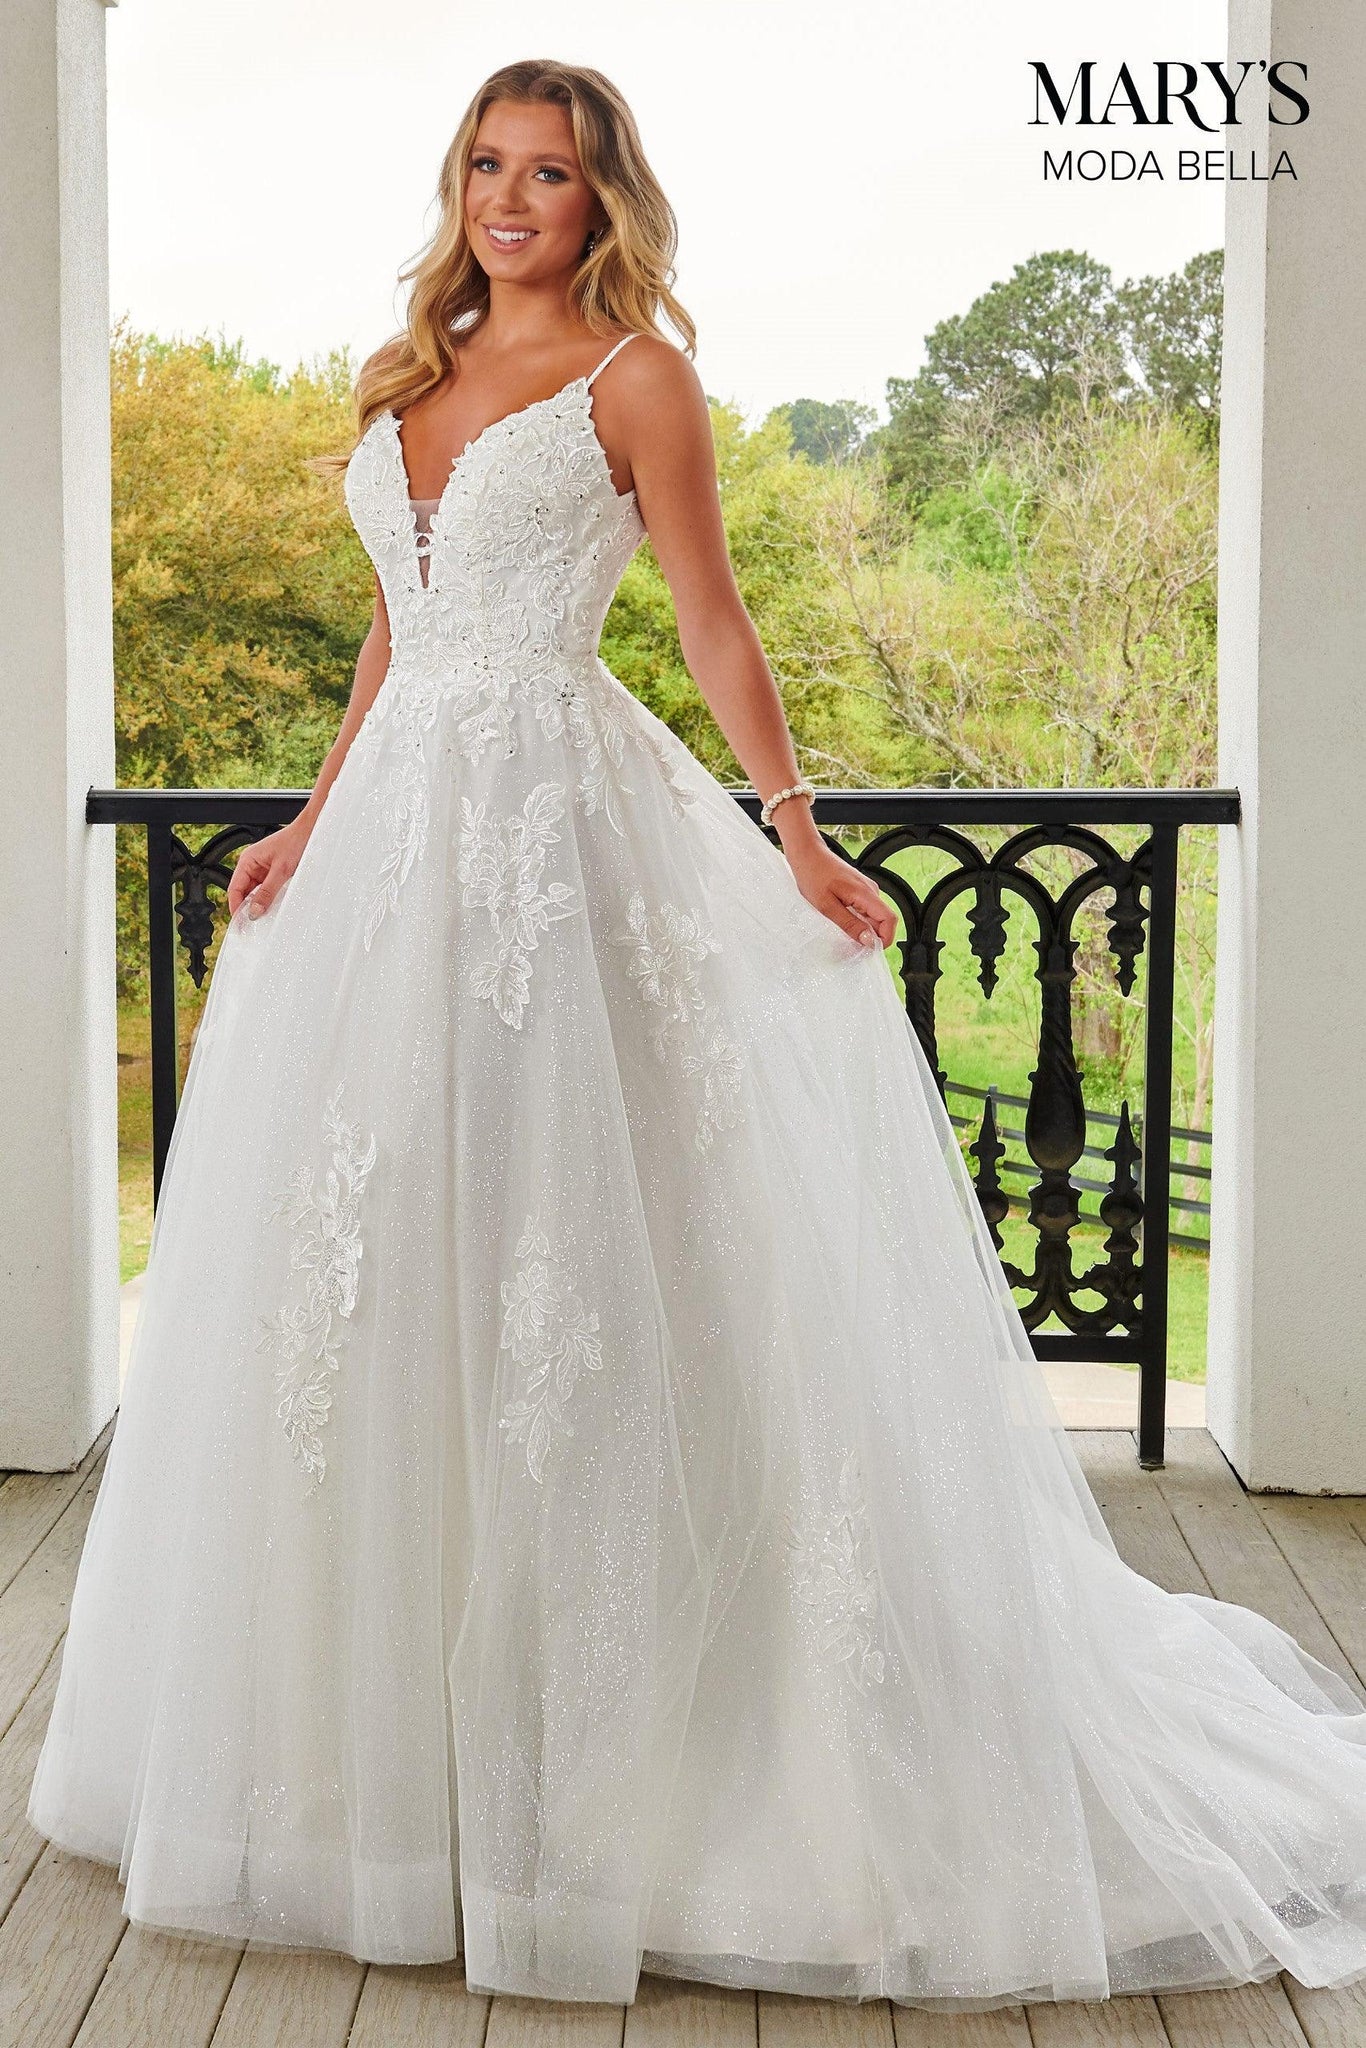 MARY'S BRIDAL - Claire - Adore Bridal and Occasion Wear